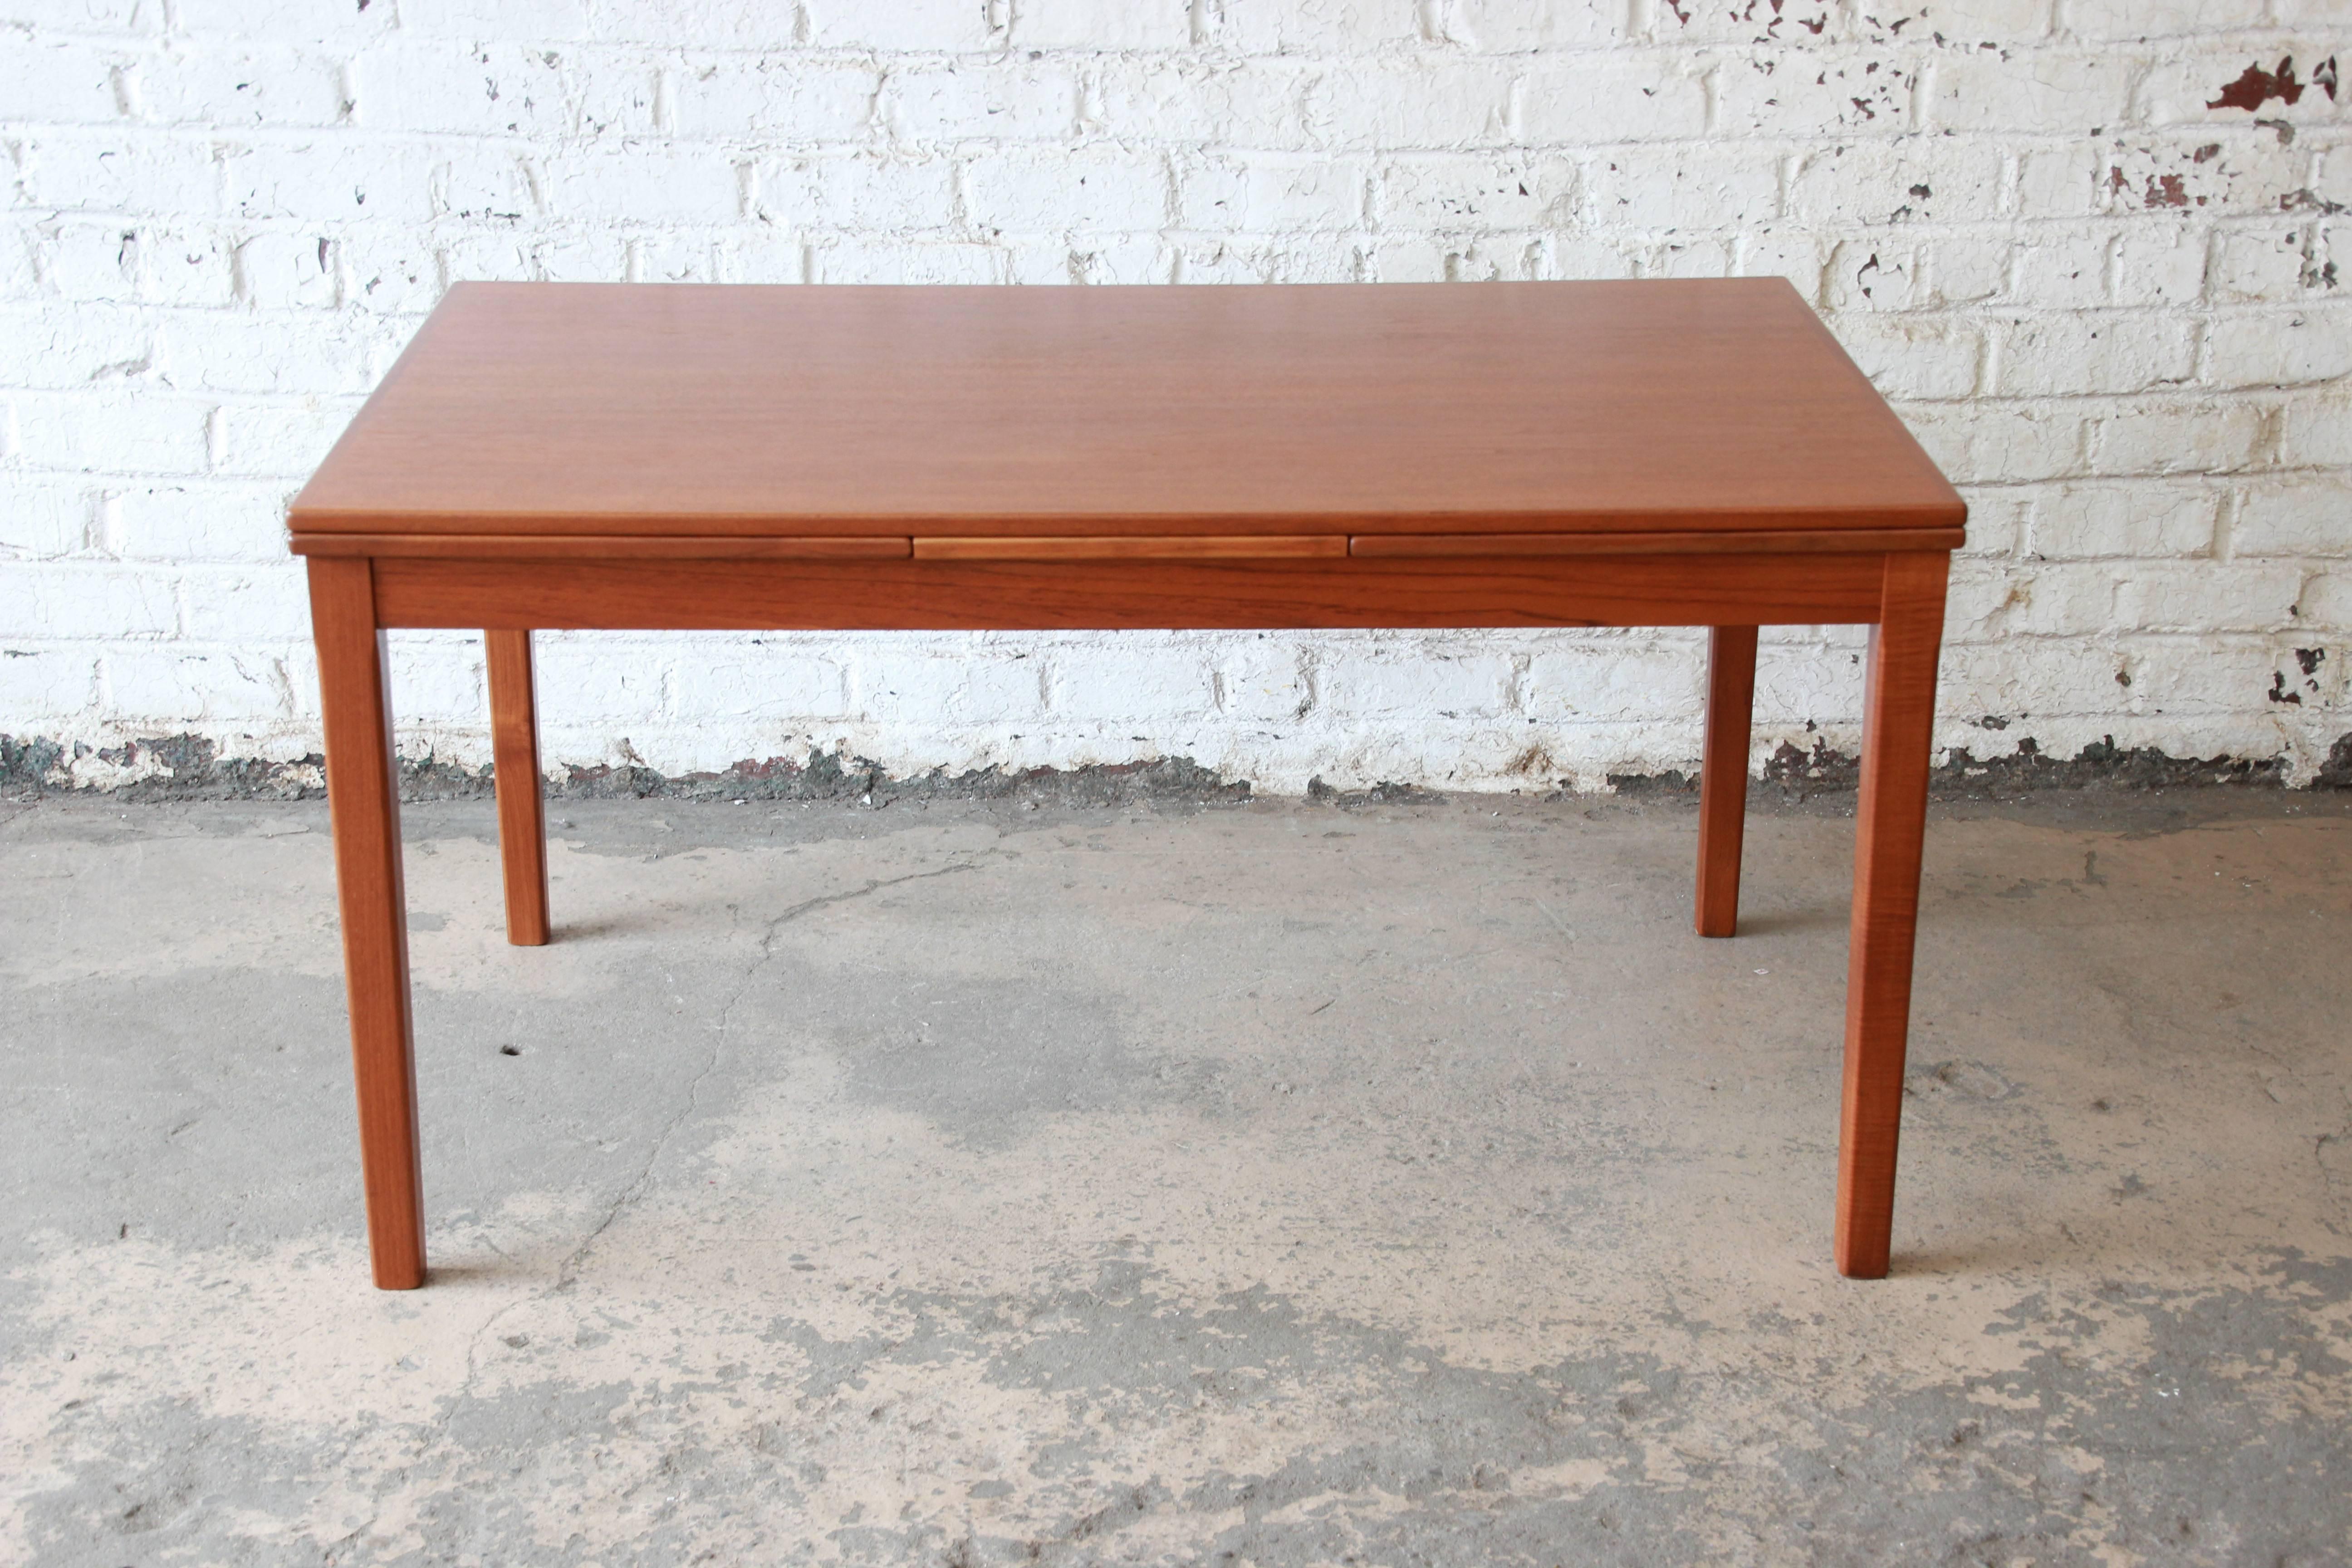 A beautiful 1960s Danish Modern teak draw leaf dining table in the style of Johannes Andersen for Uldum Møbelfabrik. The table features clean Mid-Century lines and gorgeous teak wood grain. It has been refinished and is in excellent condition.